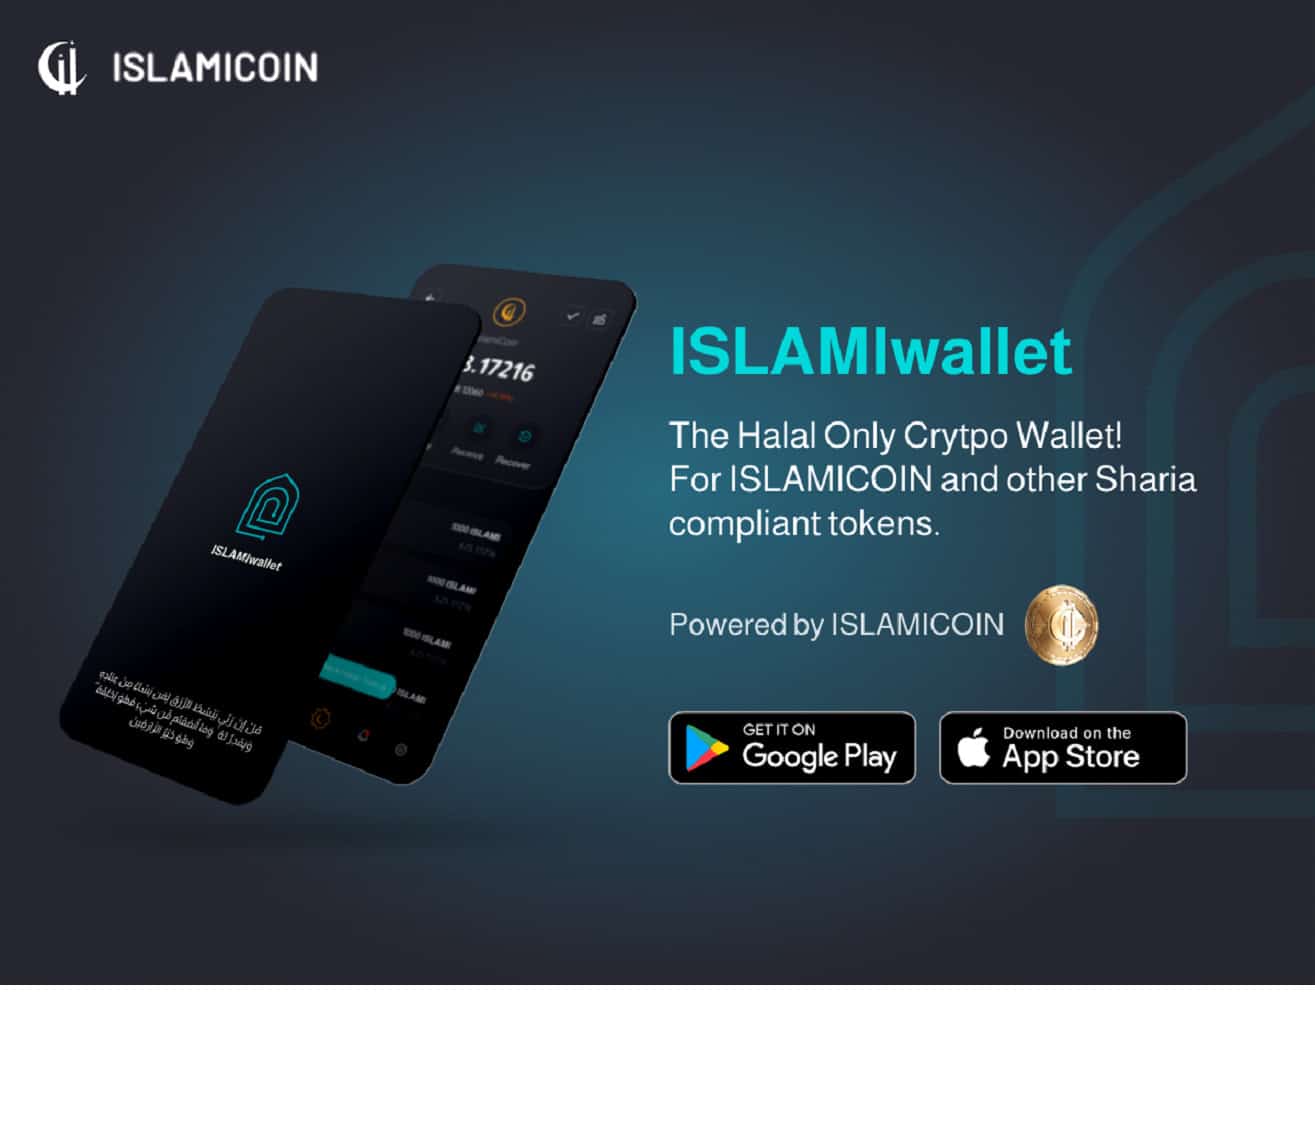 Islamiwallet-unfolds-unique-and-exclusive-features